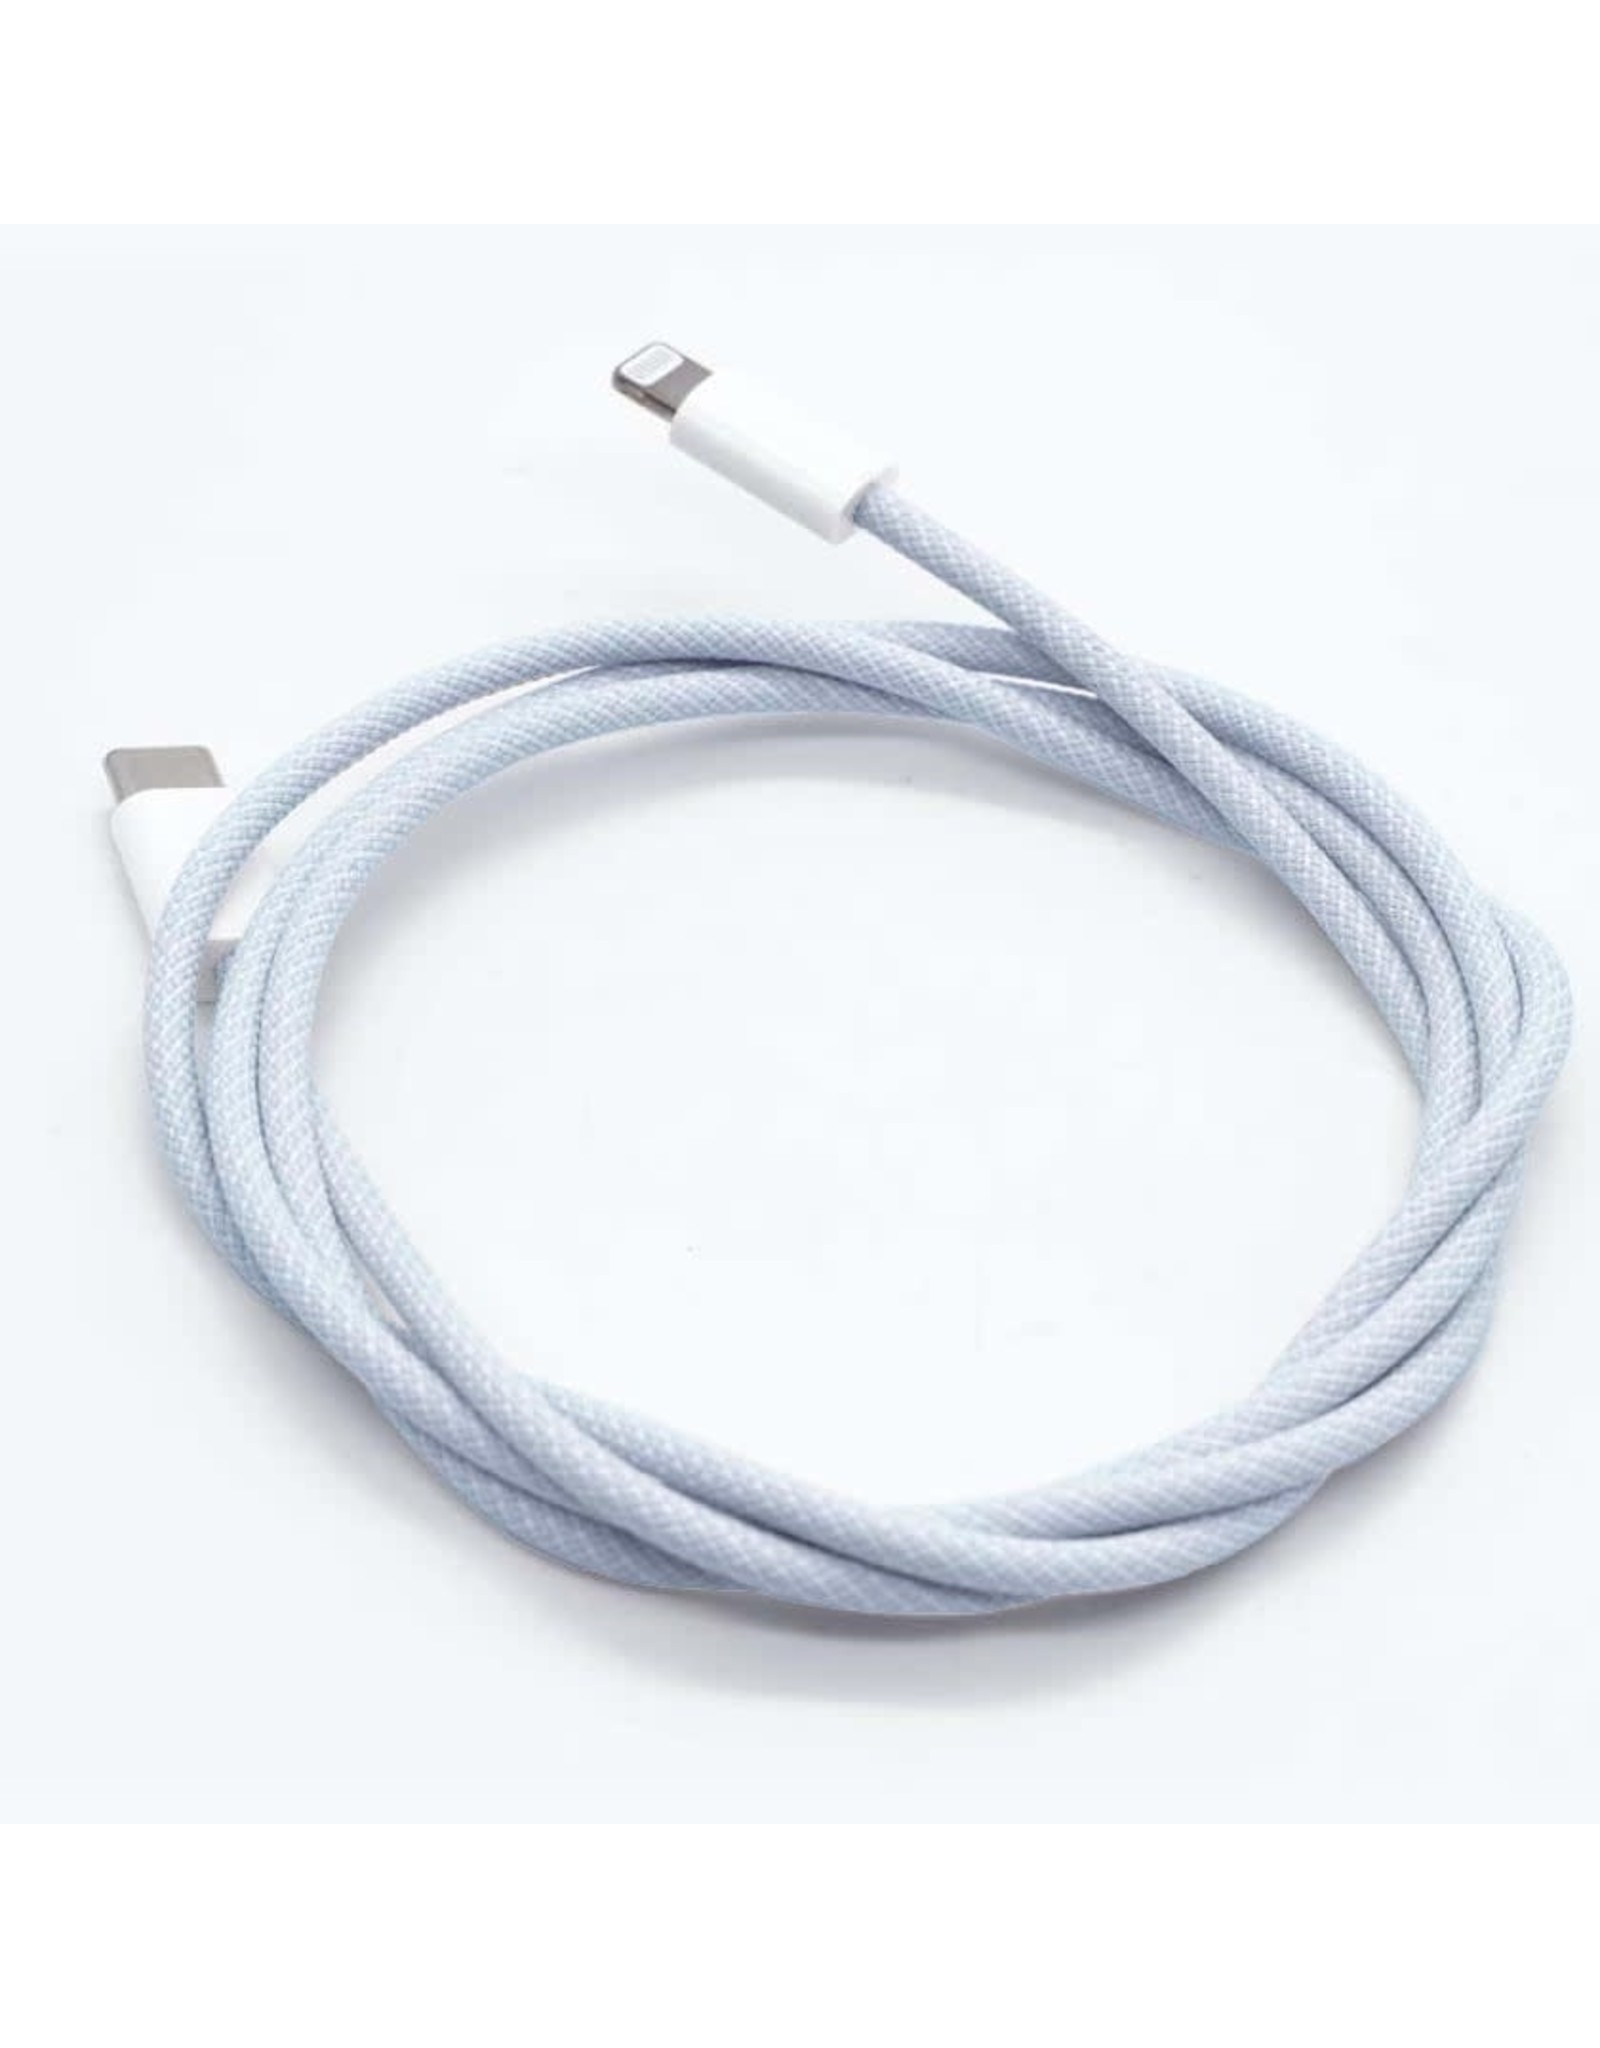 Apple USB-C to Lightning Cable, 1m,